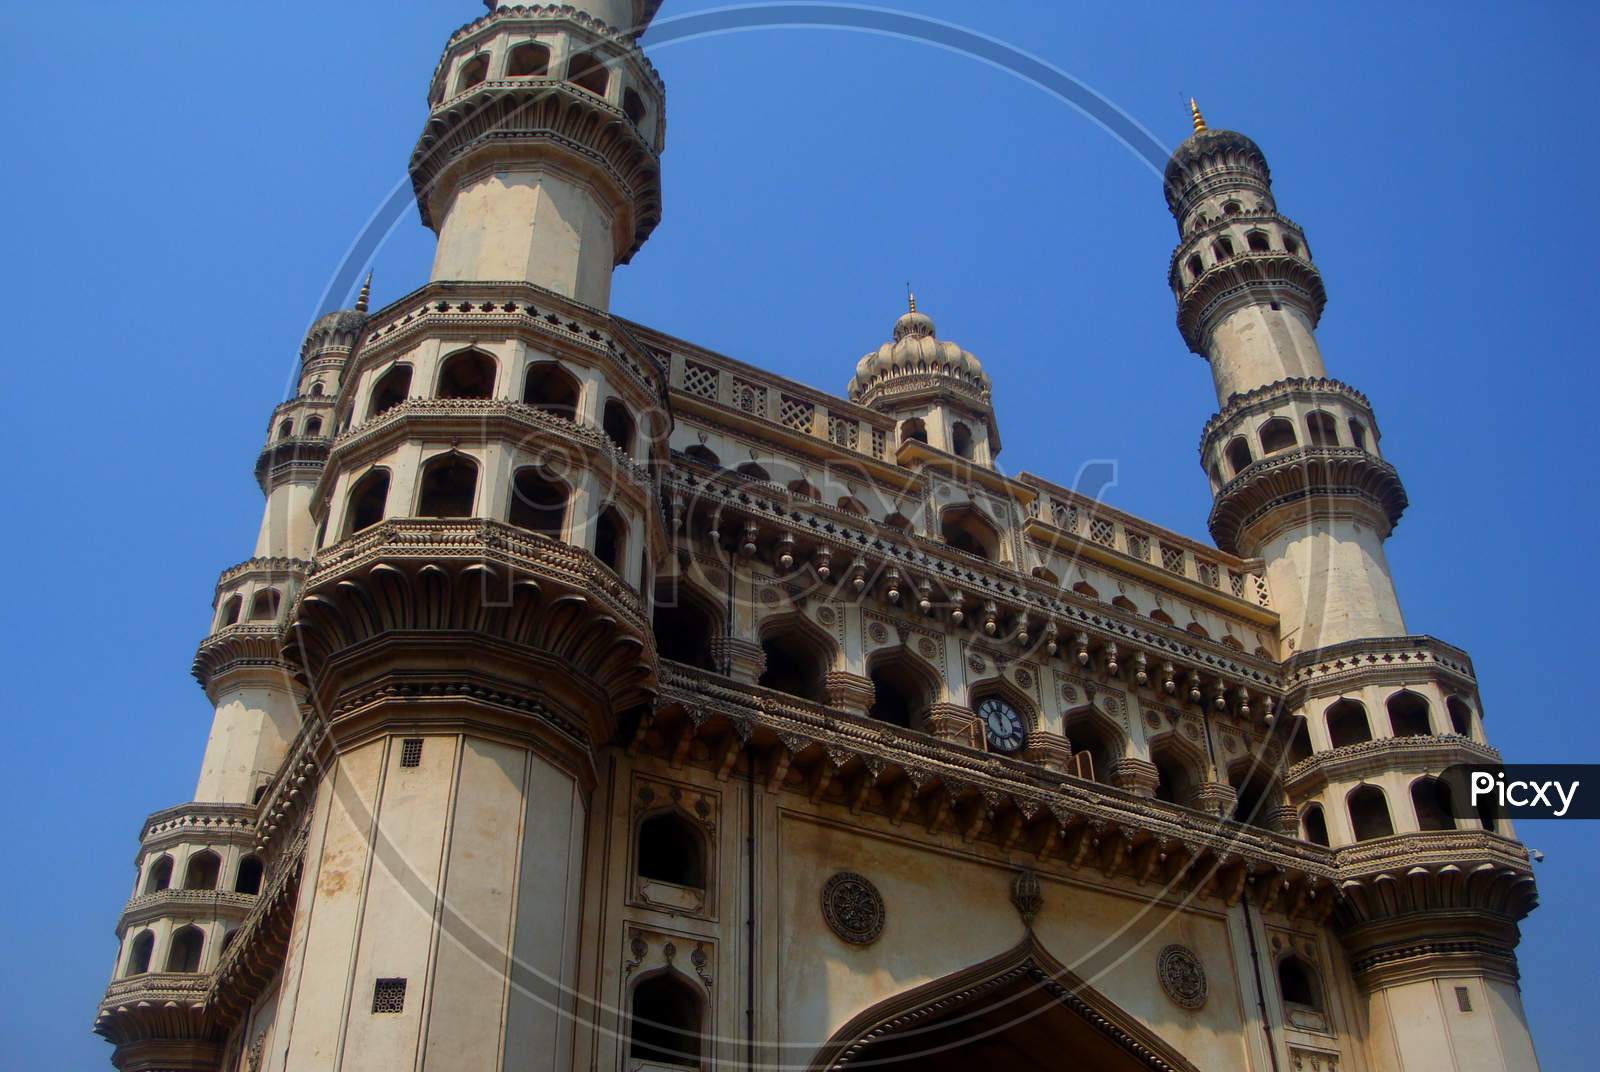 Charminar Is A Monument And Mosque Located In Hyderabad, Telangana, India.